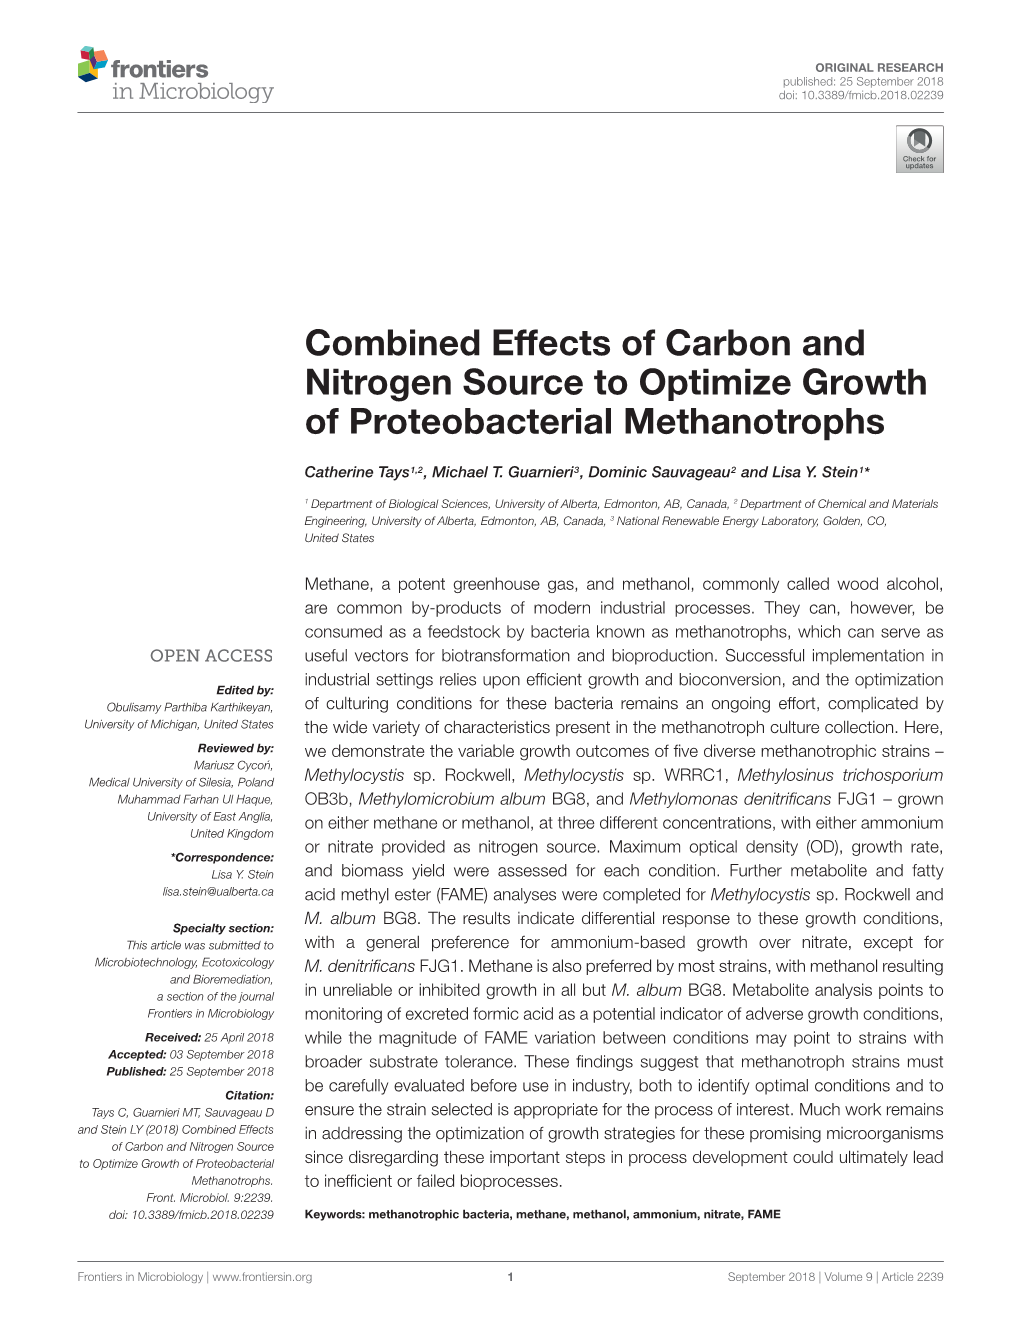 Combined Effects of Carbon and Nitrogen Source to Optimize Growth of Proteobacterial Methanotrophs